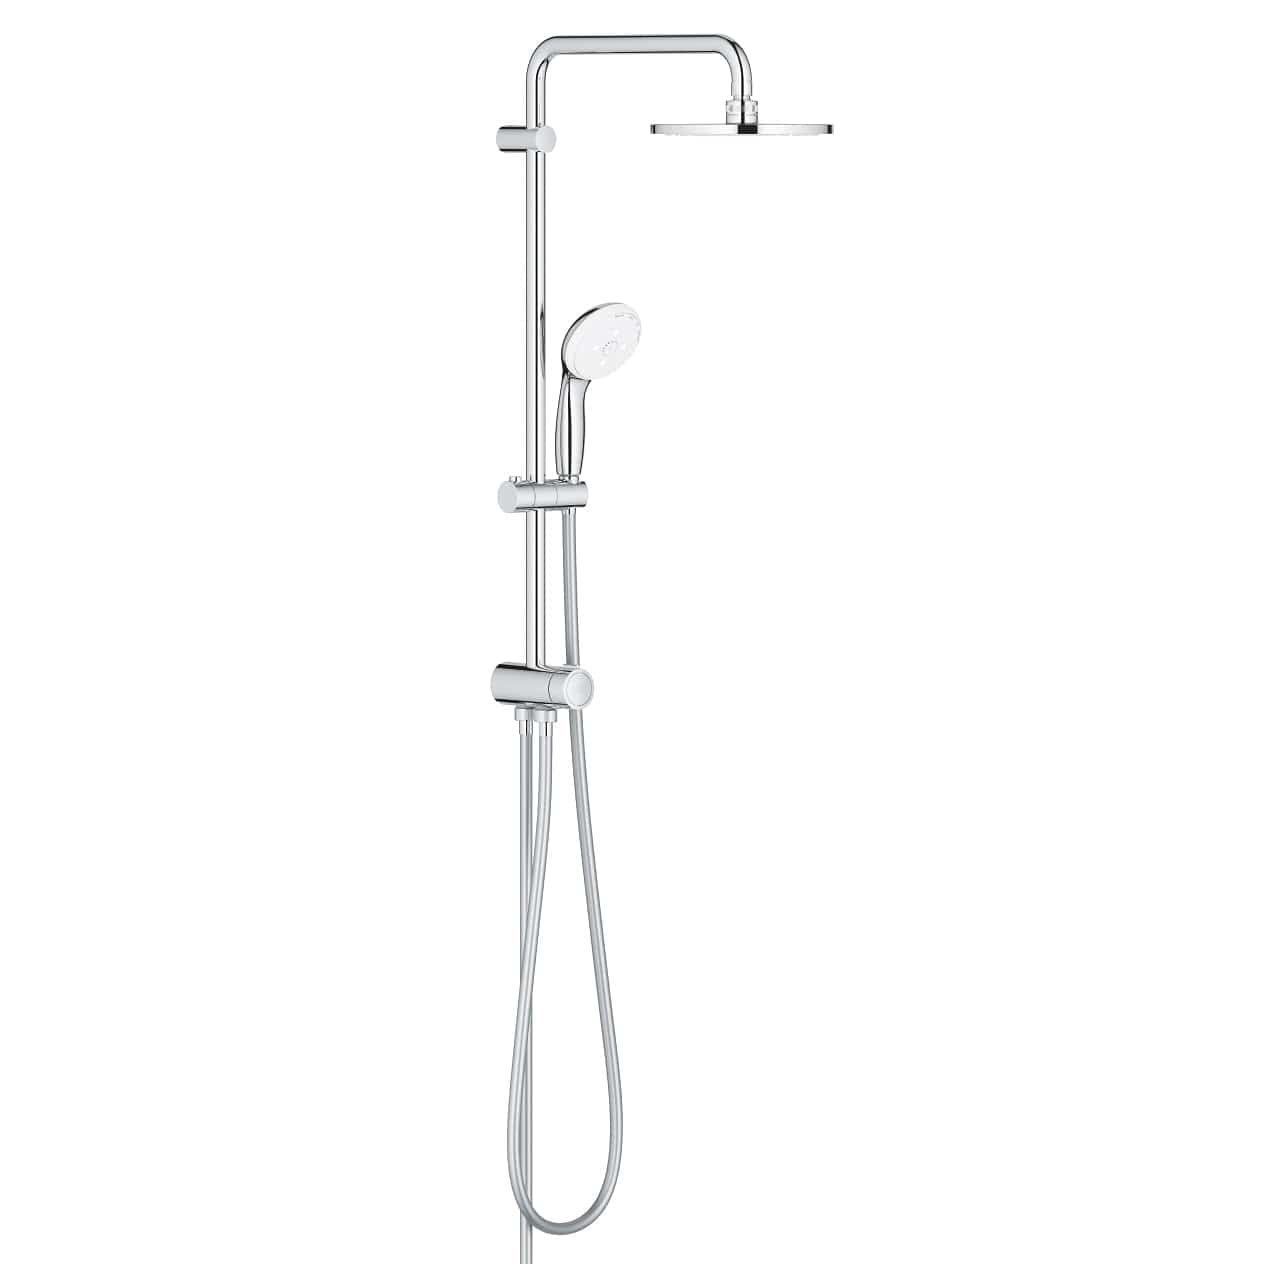 Grohe Tempesta System 200 Flex Shower System with Diverter for Wall Mounting | Supply Master | Accra, Ghana Shower Set Buy Tools hardware Building materials